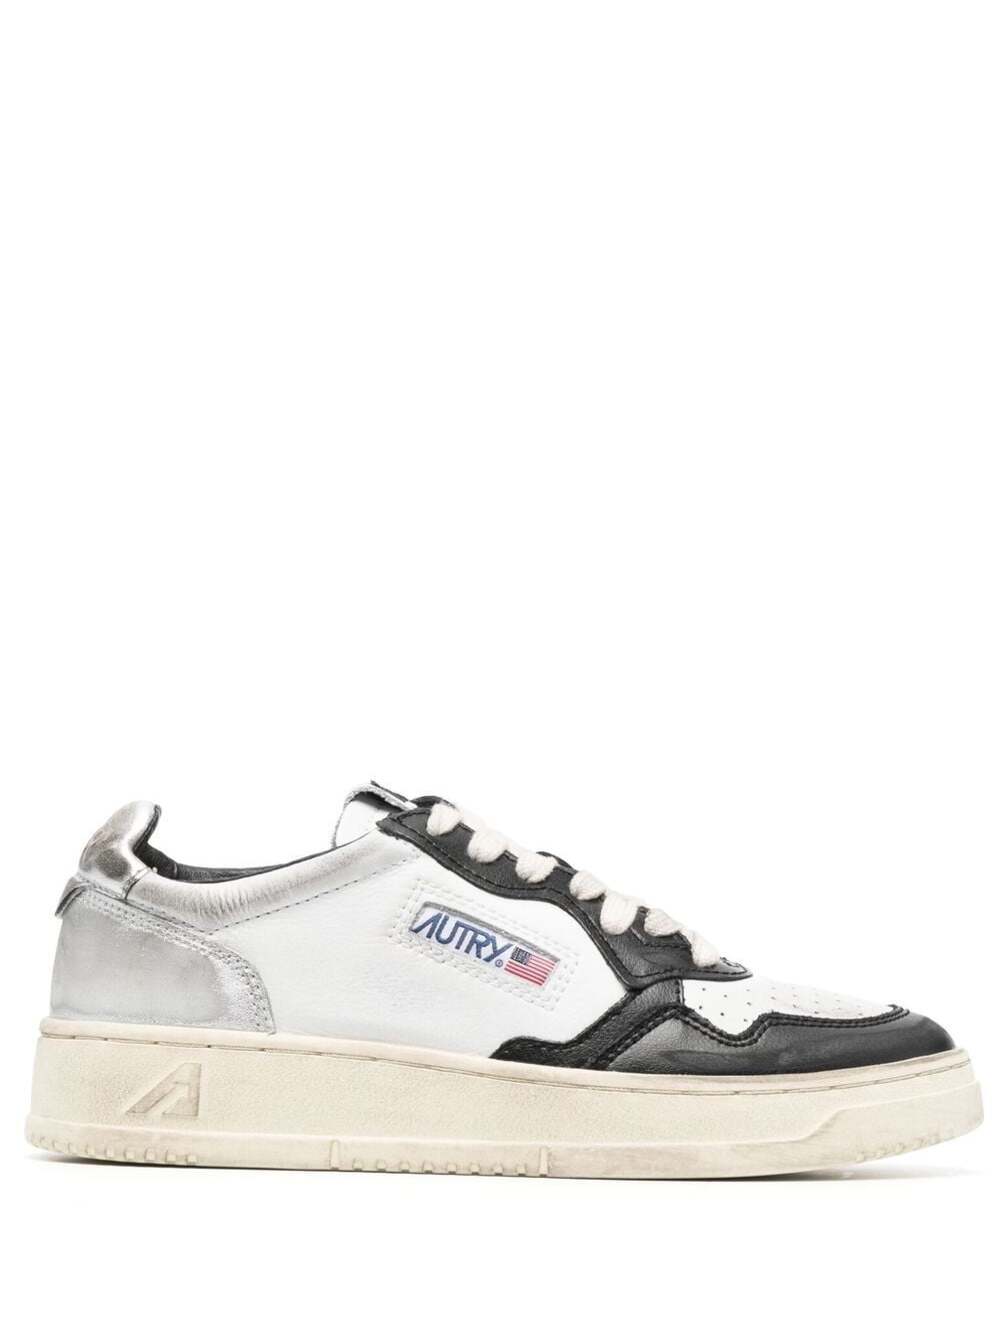 Autry Black And White Medalist Low Top Sneakers Distressed Effect In Cow Leather In White Grey Silver